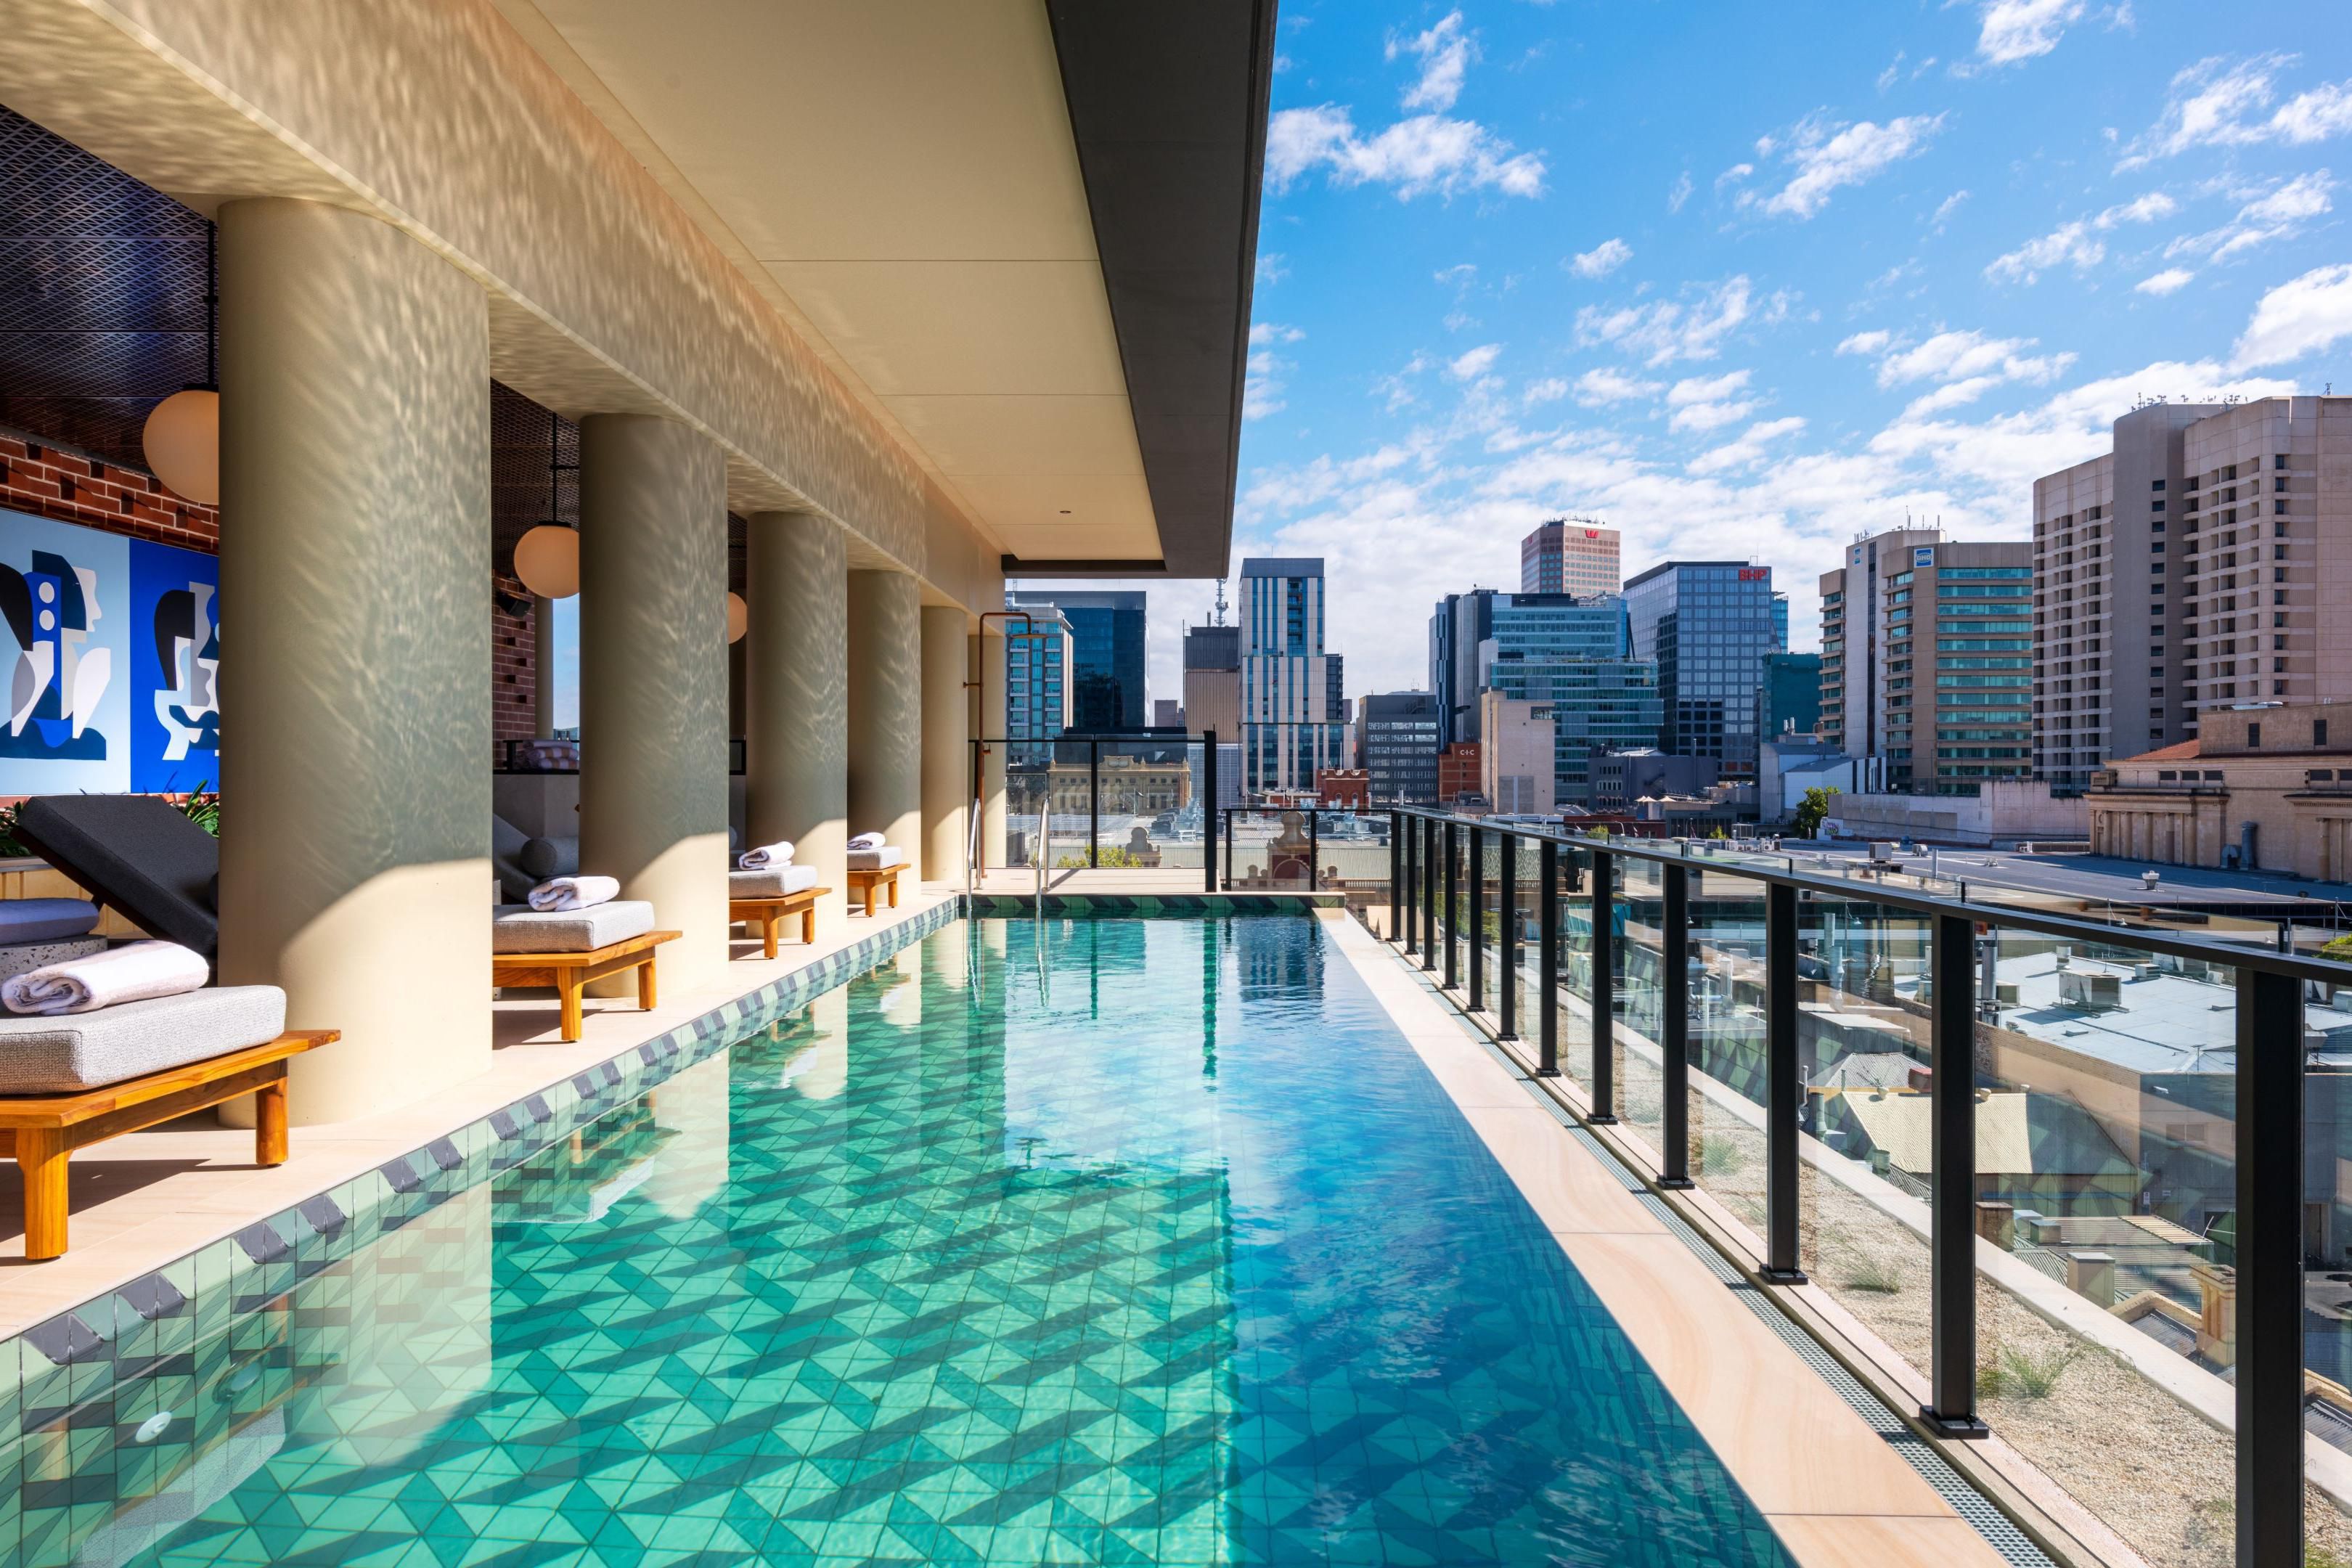 Located on the 4th floor of the hotel, the heated lap pool offers stunning views of the Adelaide city skyline and is the perfect spot to sun-bake in. If you've spent the day exploring the neighbourhood, cool down here with a cocktail before dinner. Open from 6am - 9pm.